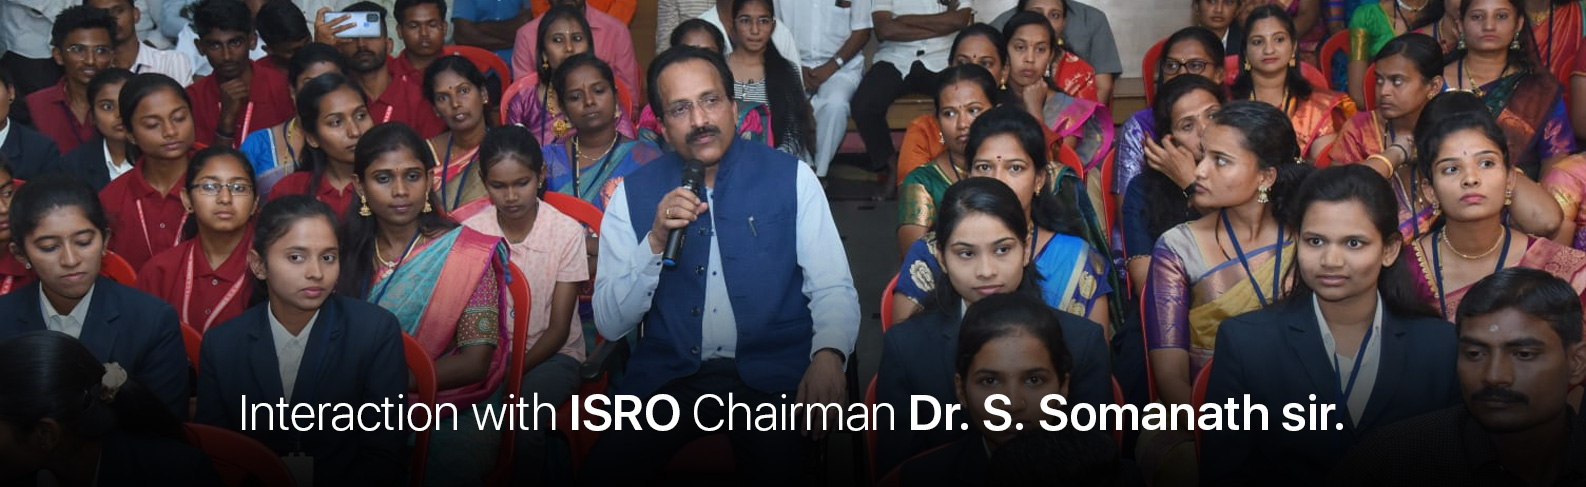 Interaction with ISRO Chairman Dr.S. Somanath sir